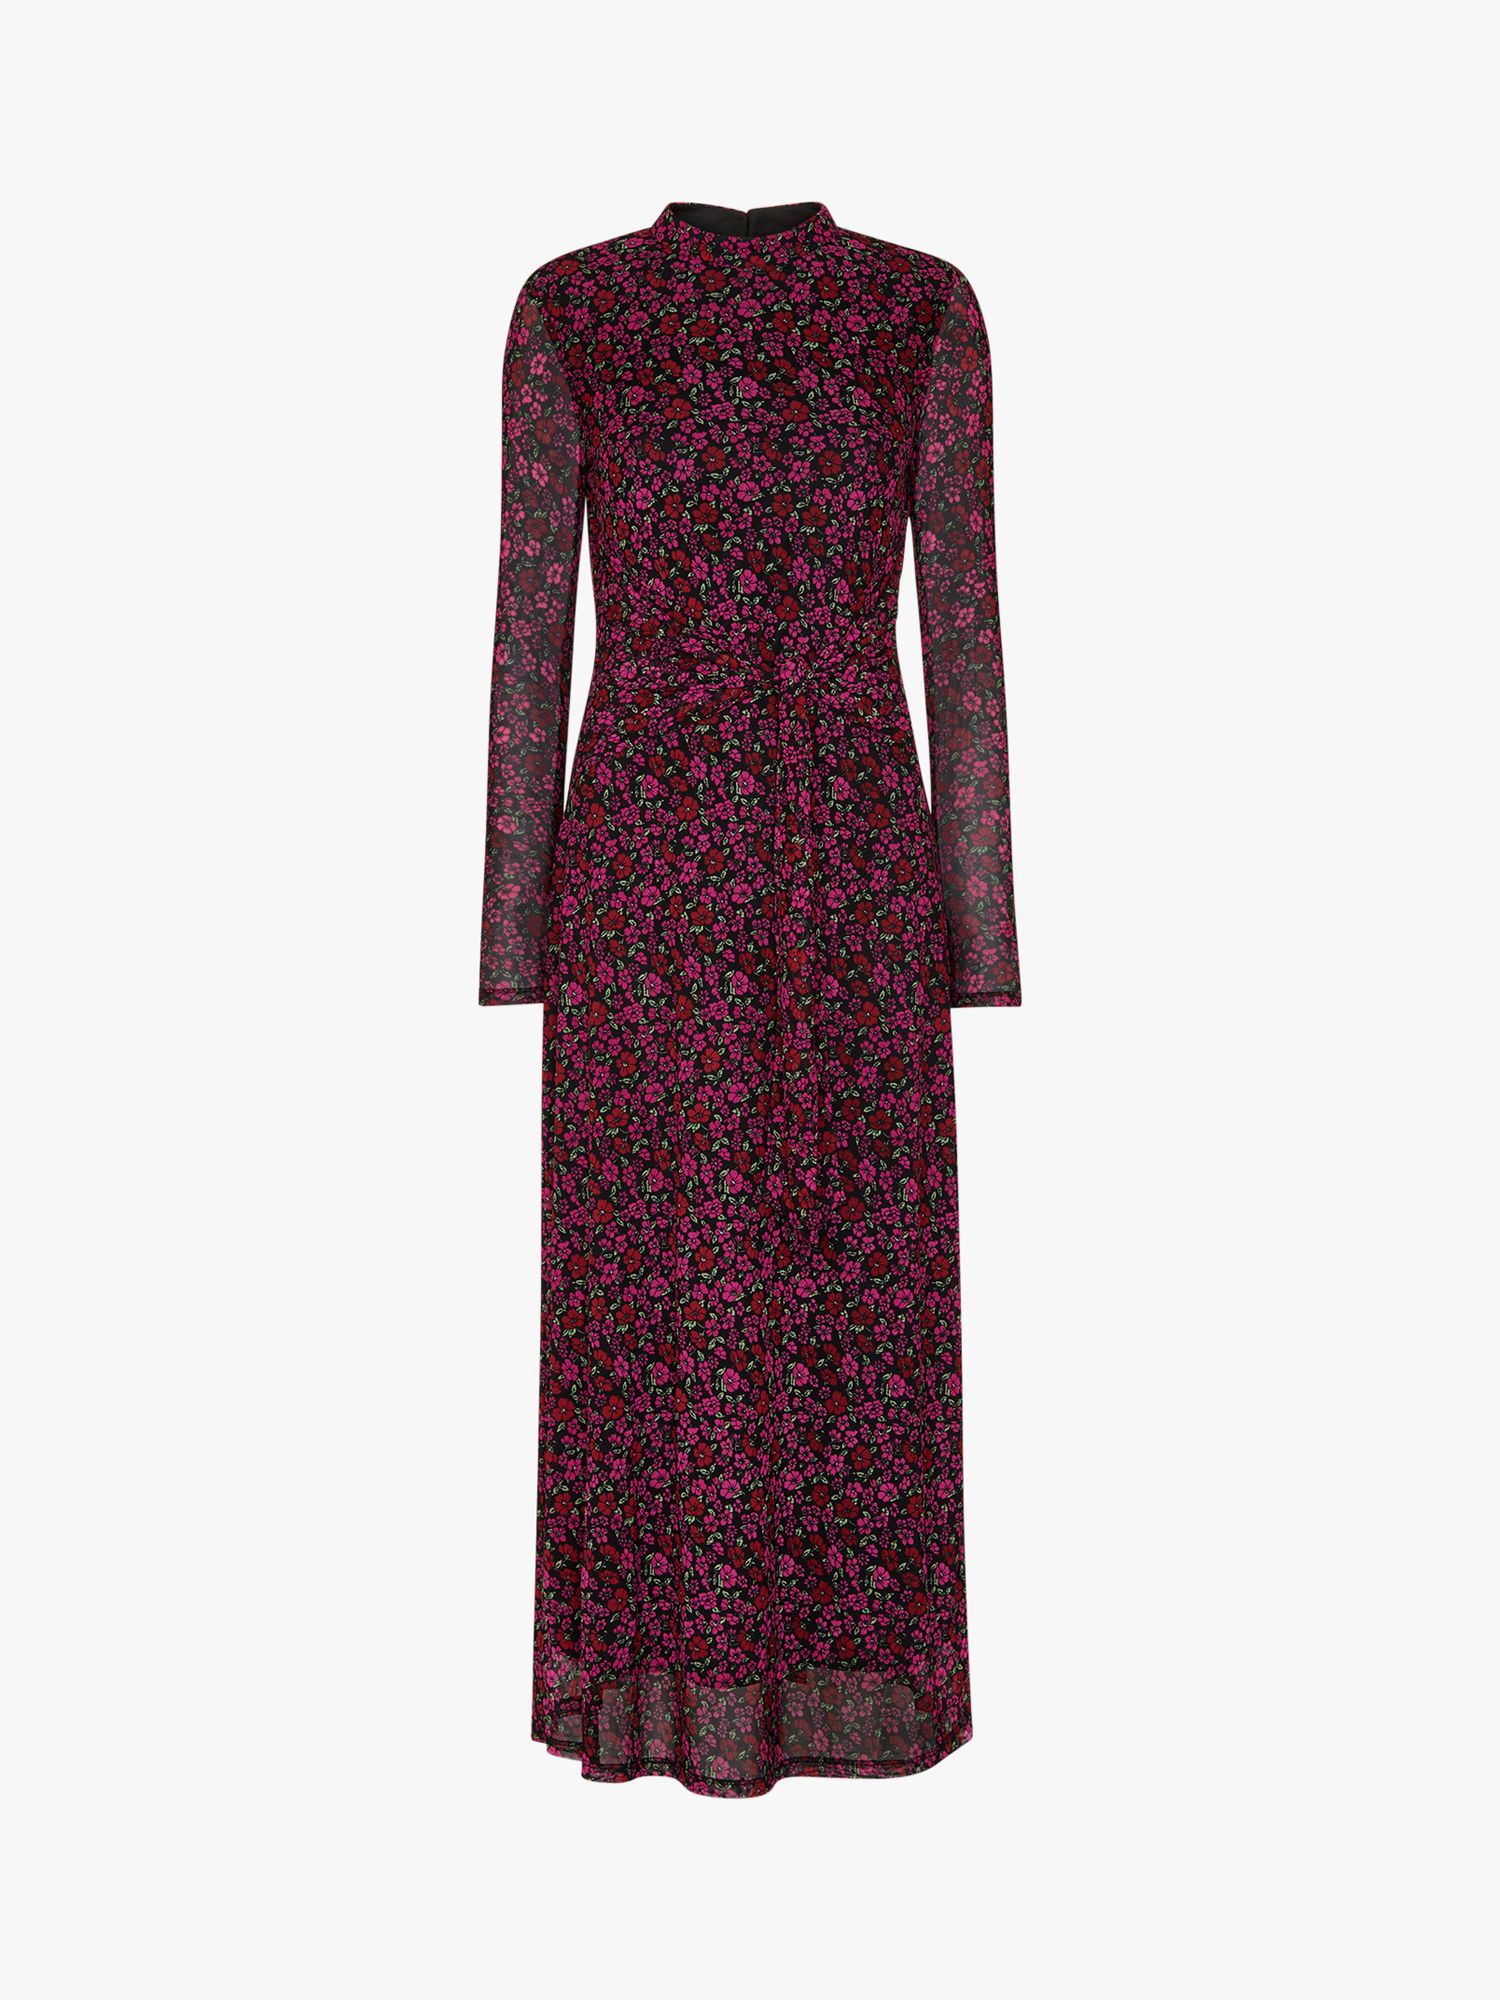 Whistles Outlined Floral Tie Mesh Midi Dress, Pink/Multi at John Lewis ...